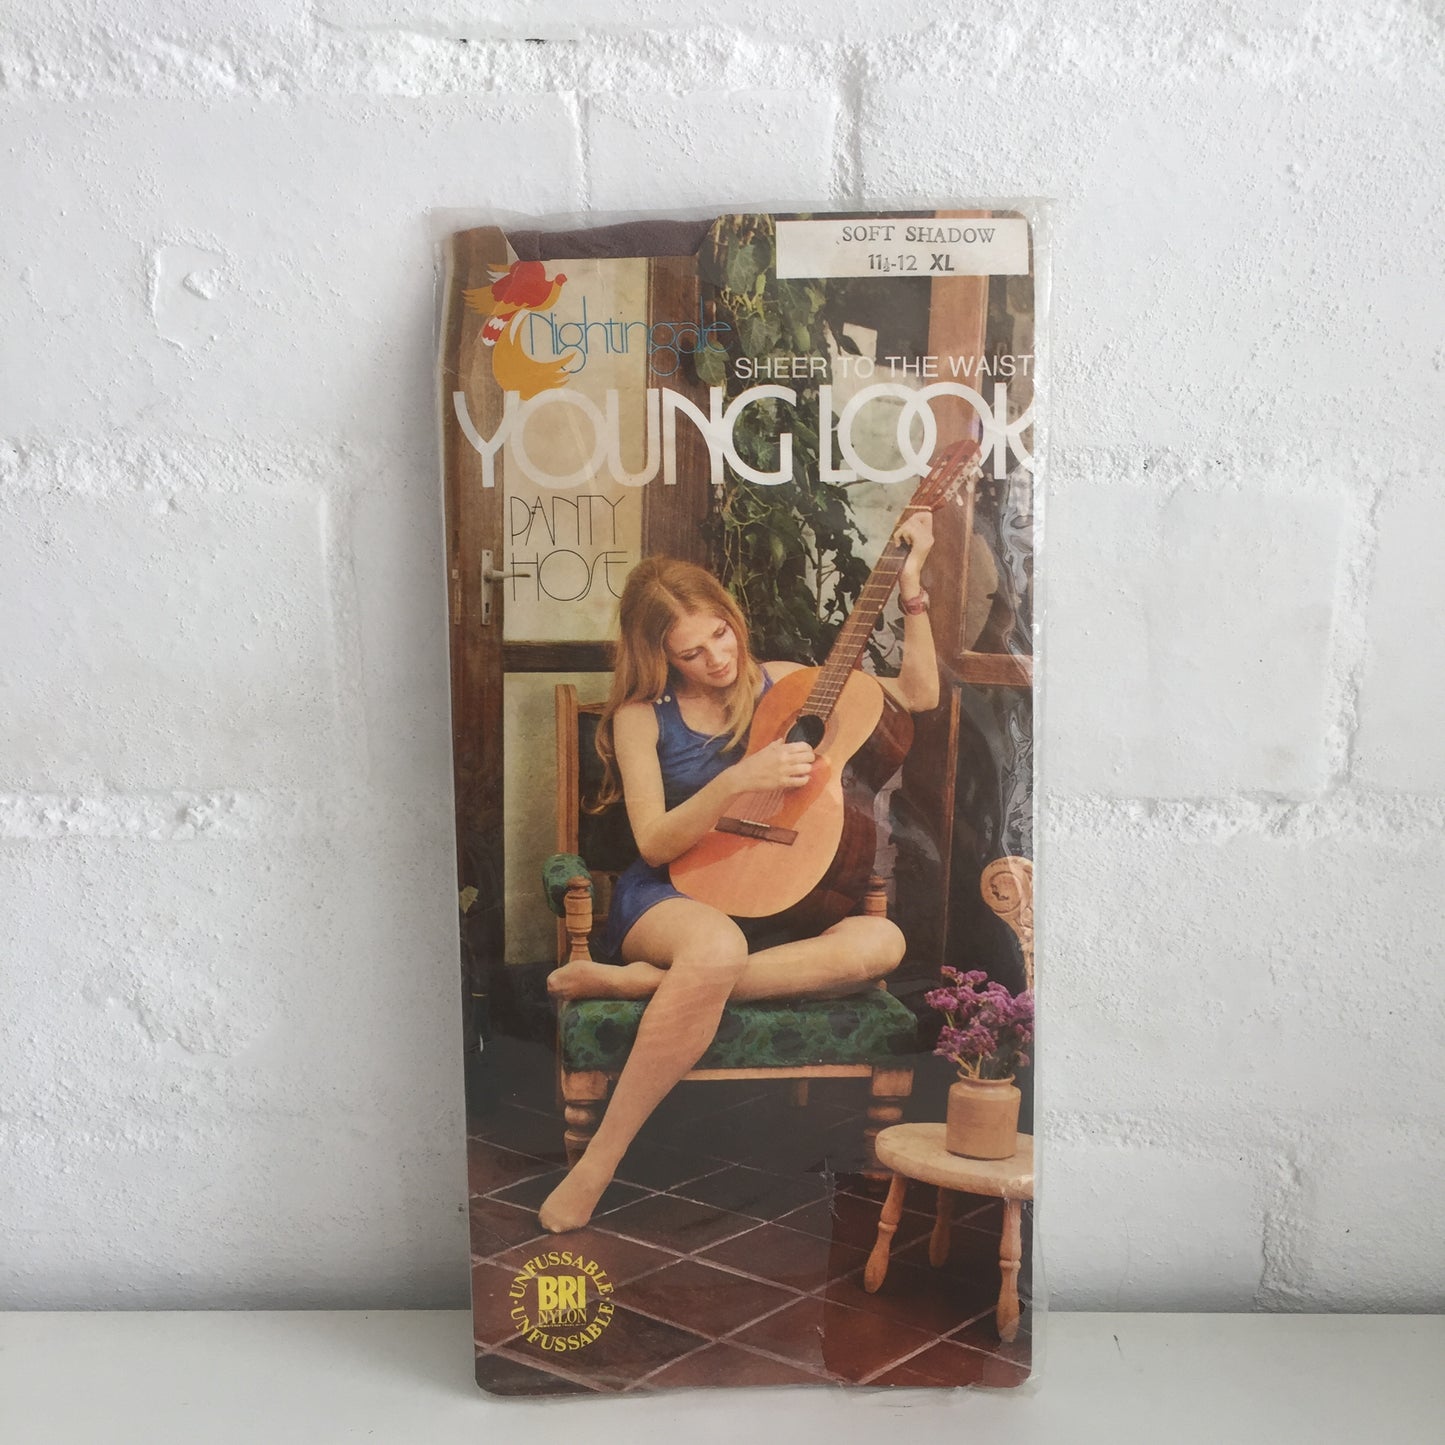 SOFT SHADOW Vintage RETRO Panty HOSE XL COOL 70's Packaging